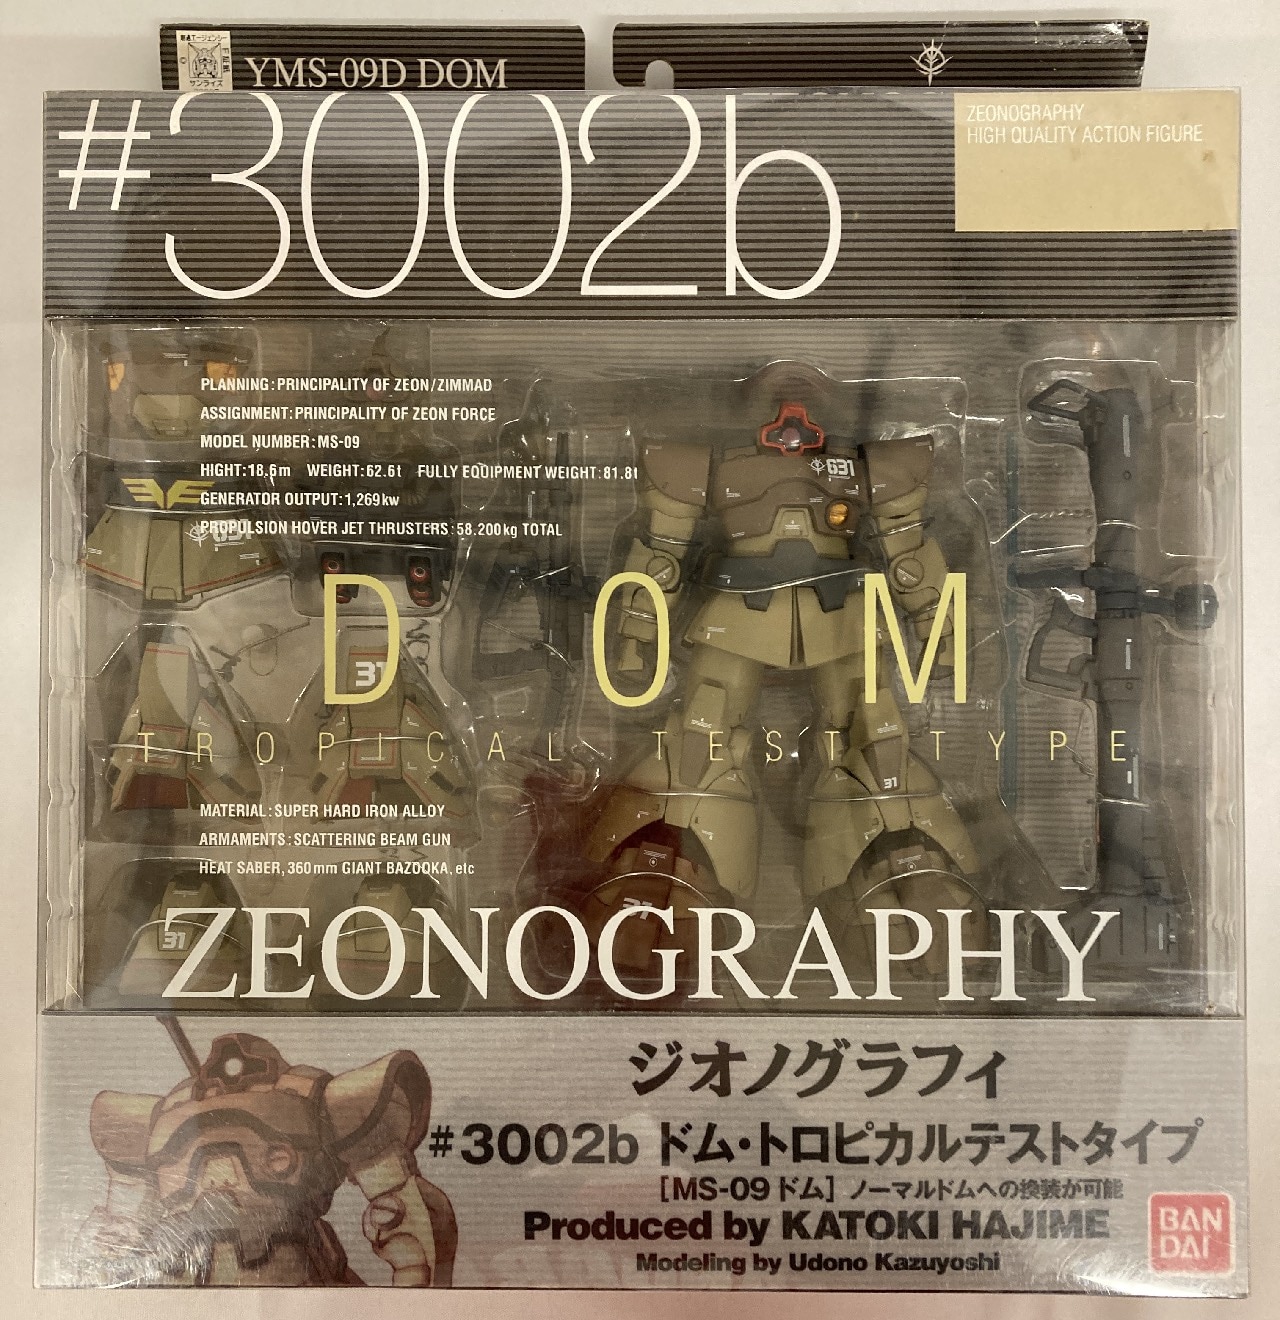 Bandai Zeonography Yms 09d Dom Tropical Test Type Ms 09 Dom 3002b